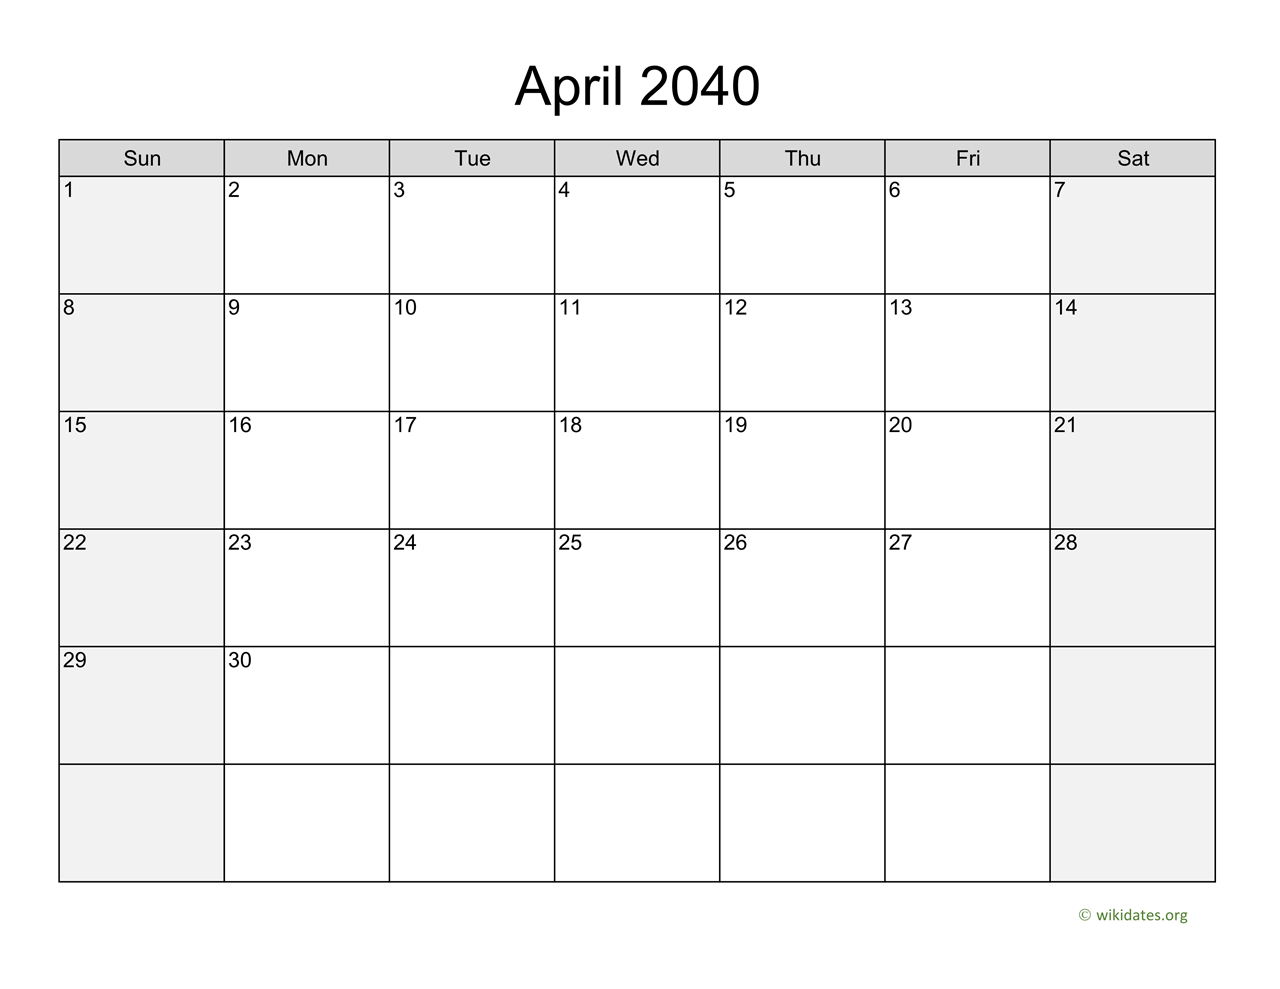 April 2040 Calendar with Weekend Shaded | WikiDates.org